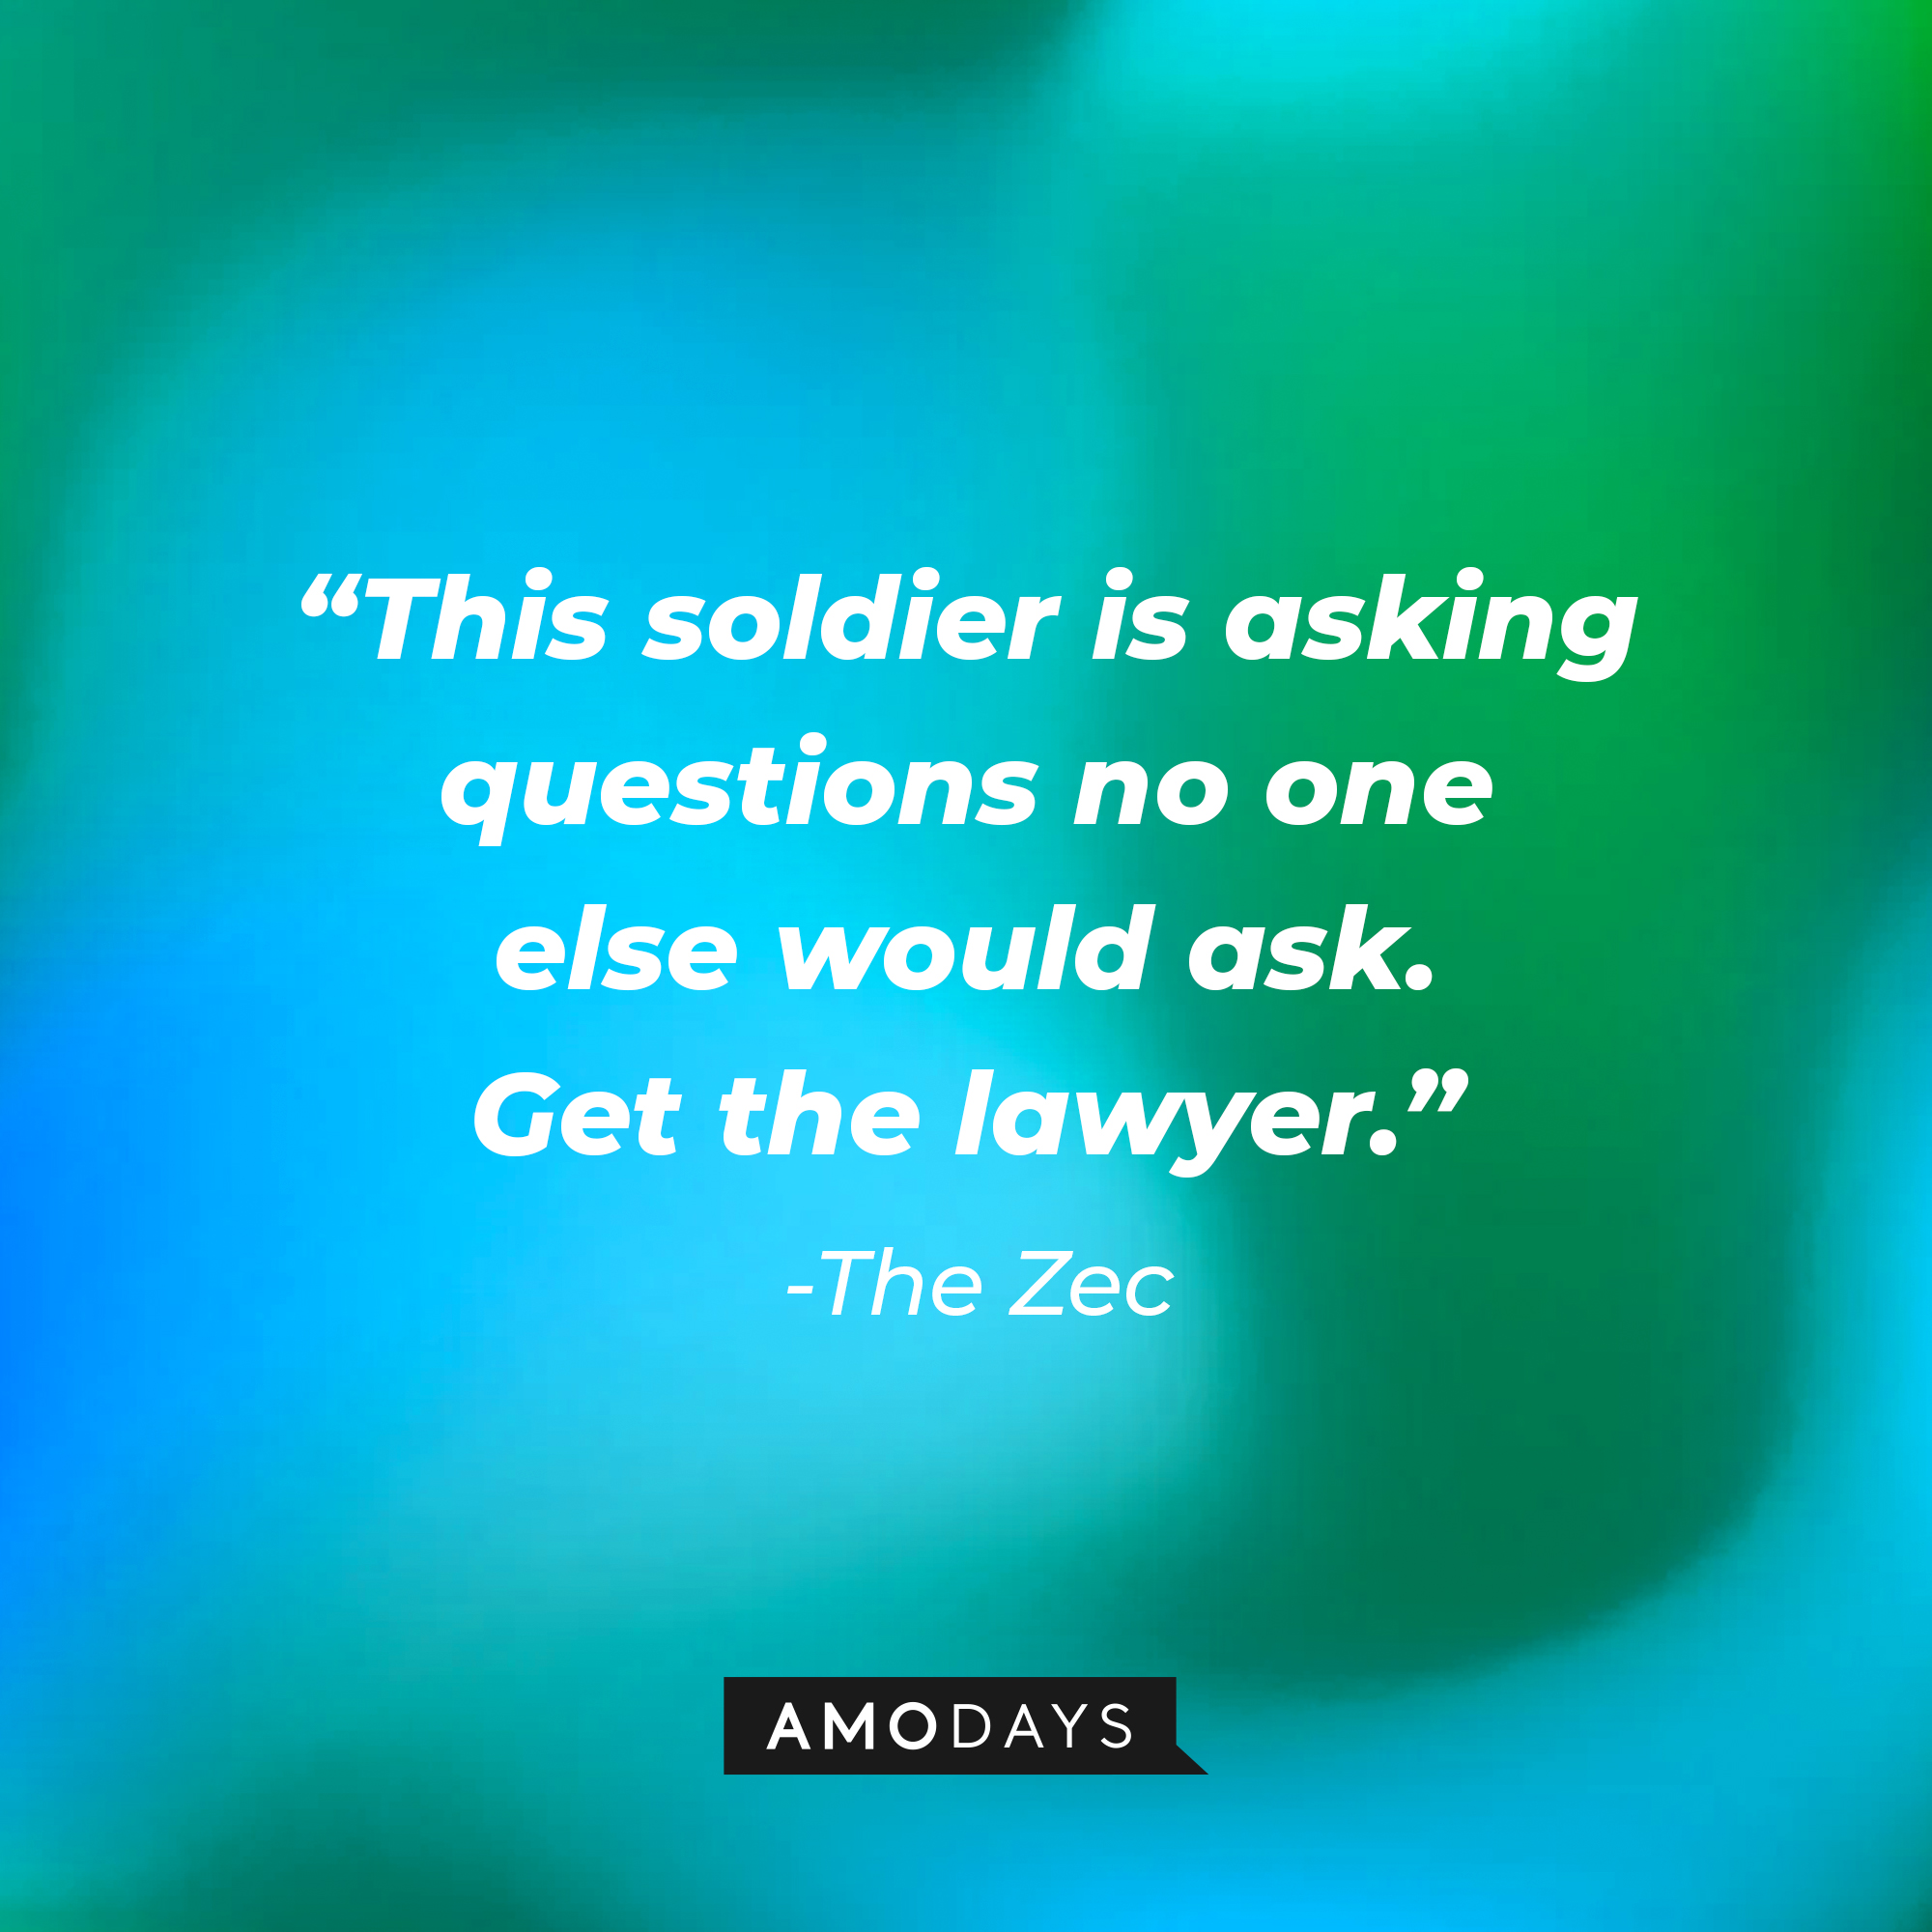 The Zec's quote: "This soldier is asking questions no one else would ask. Get the lawyer" | Source: Amodays